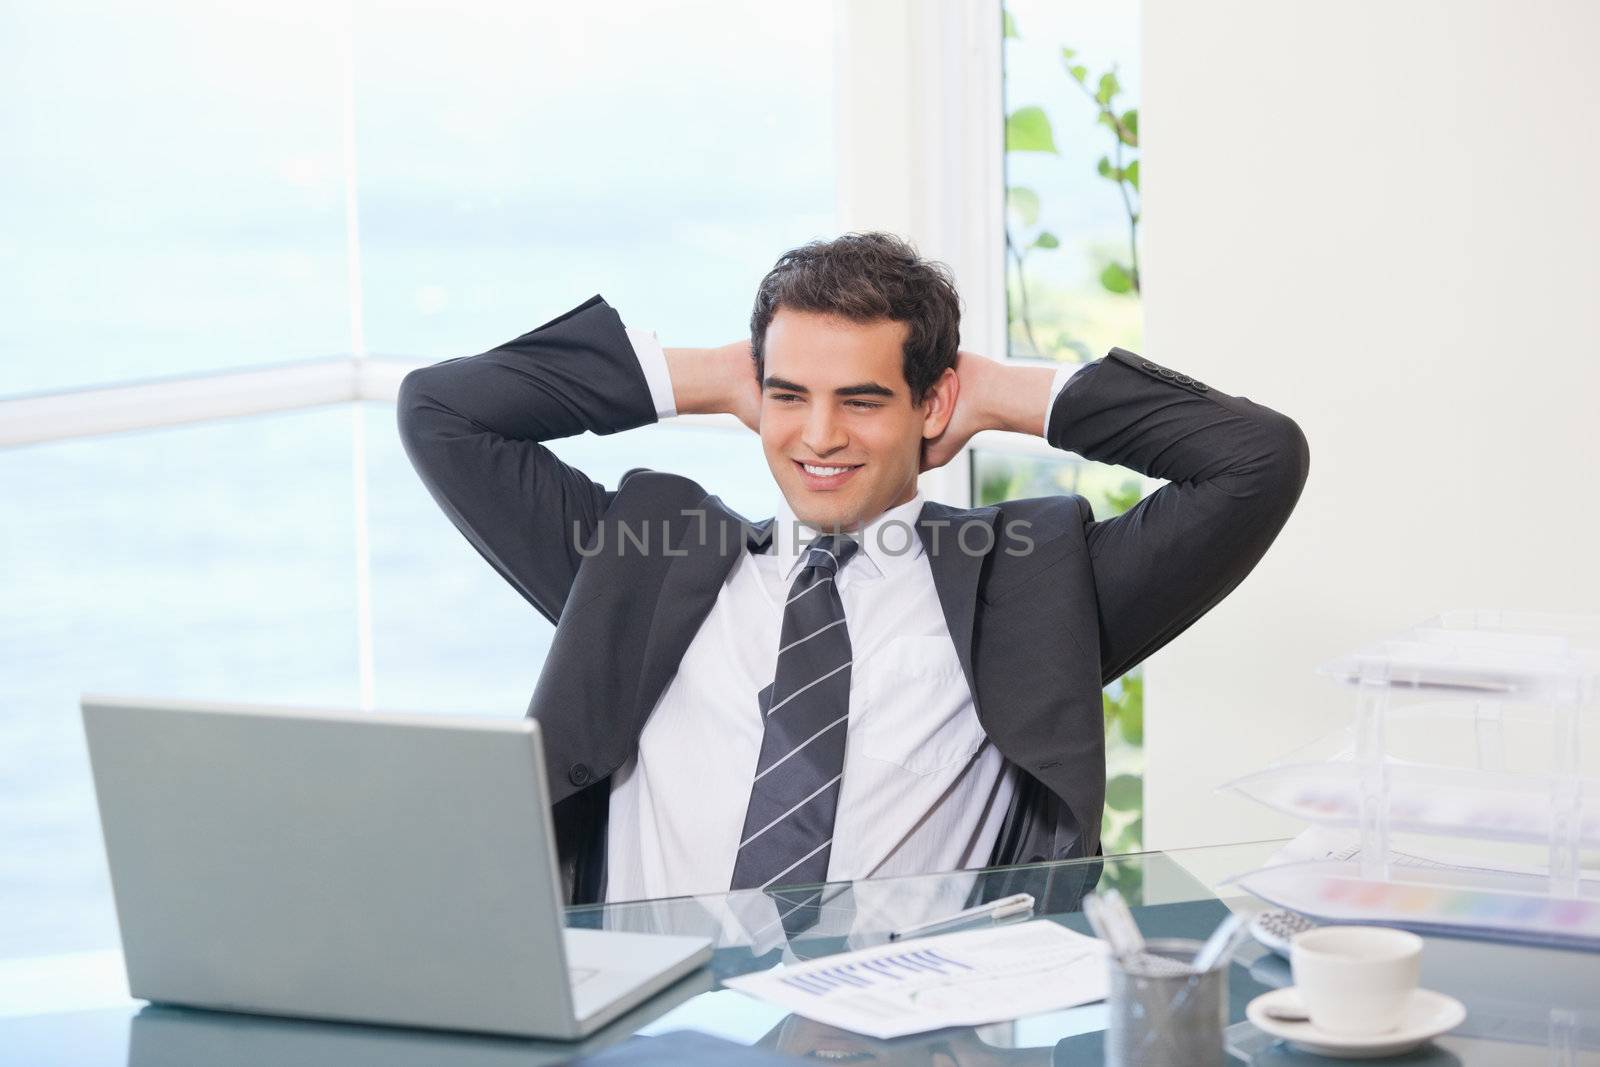 Man crossing his arms behind his head  in an office